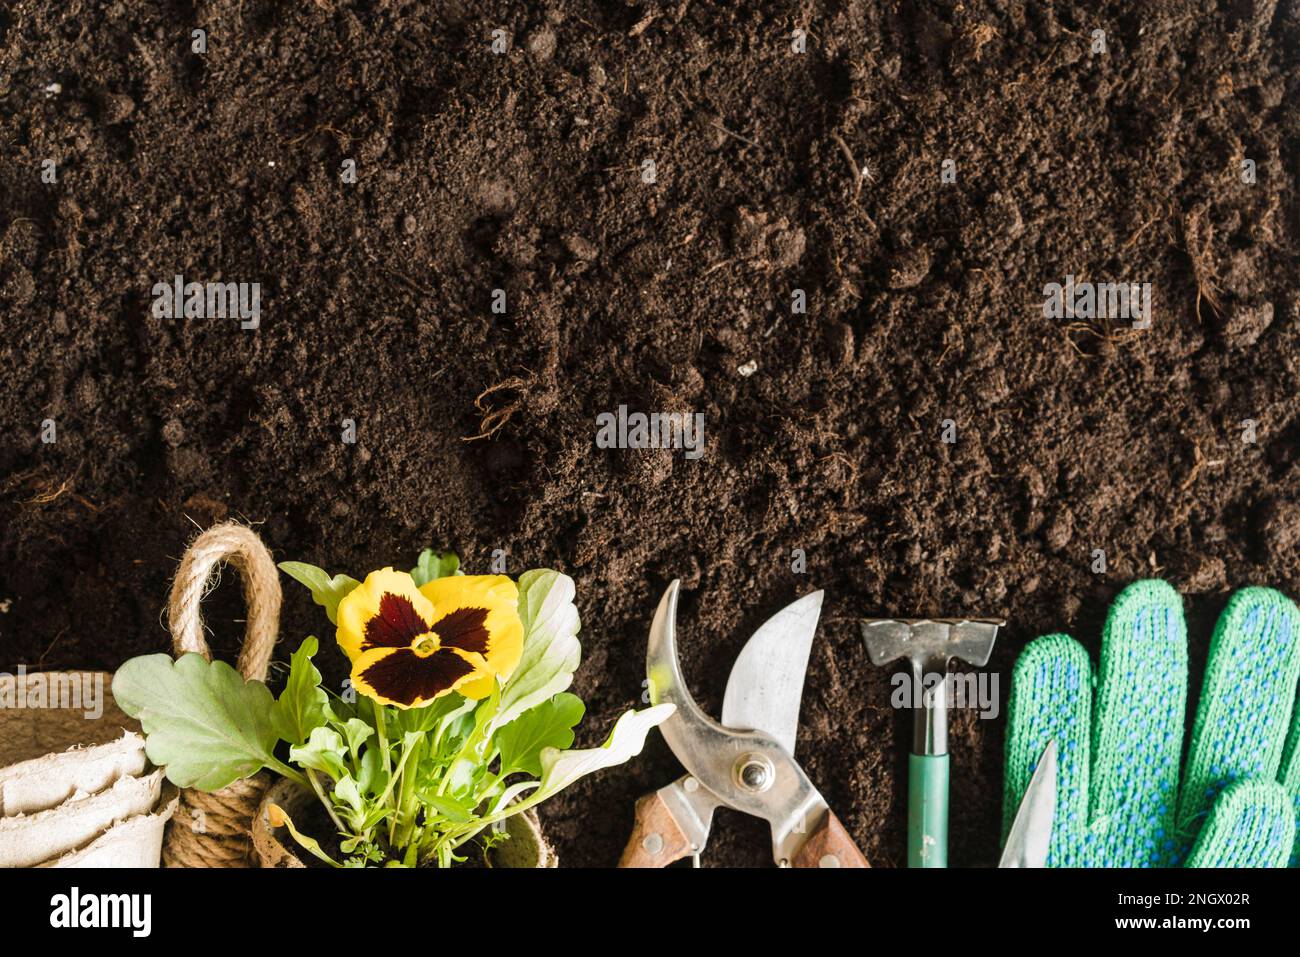 peat pots pansy plant gardening tools gloves soil Stock Photo